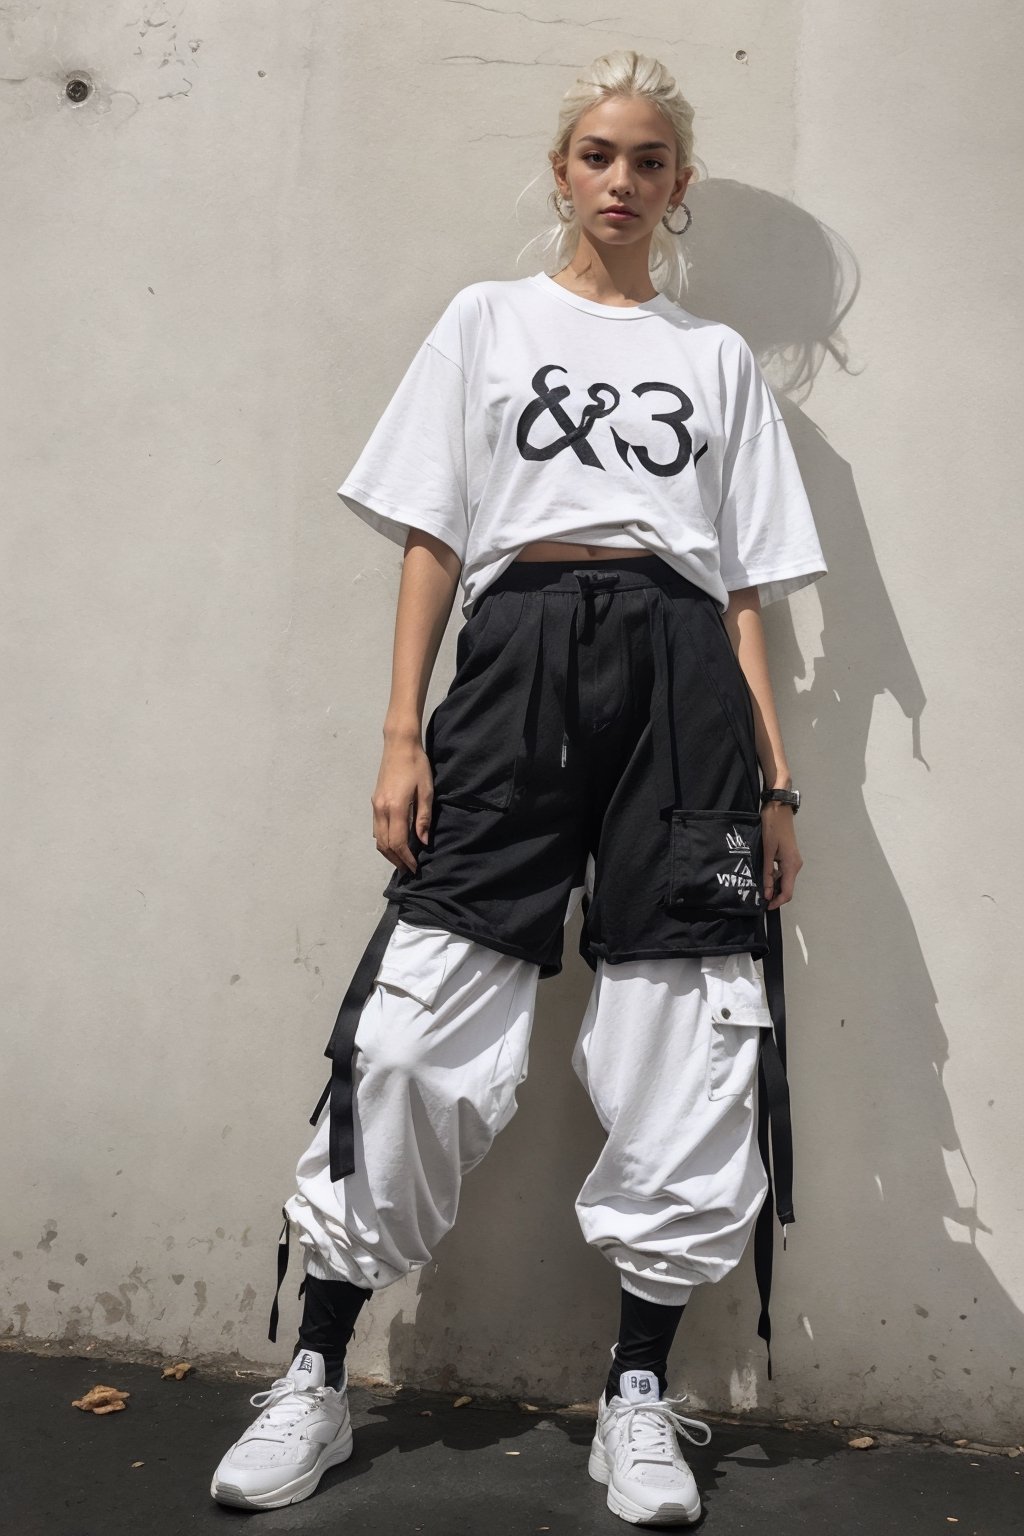 1girl, young pretty white girl, hot top model, long blonde hair, wearing a white oversize t shirt (t shirt only white color) and Acronym J36-S black pants and Acronym P30A-DS and black and white sneakers, piercings, in city, sitting near a wall, instagram model, 80mm,urban techwear,weapon